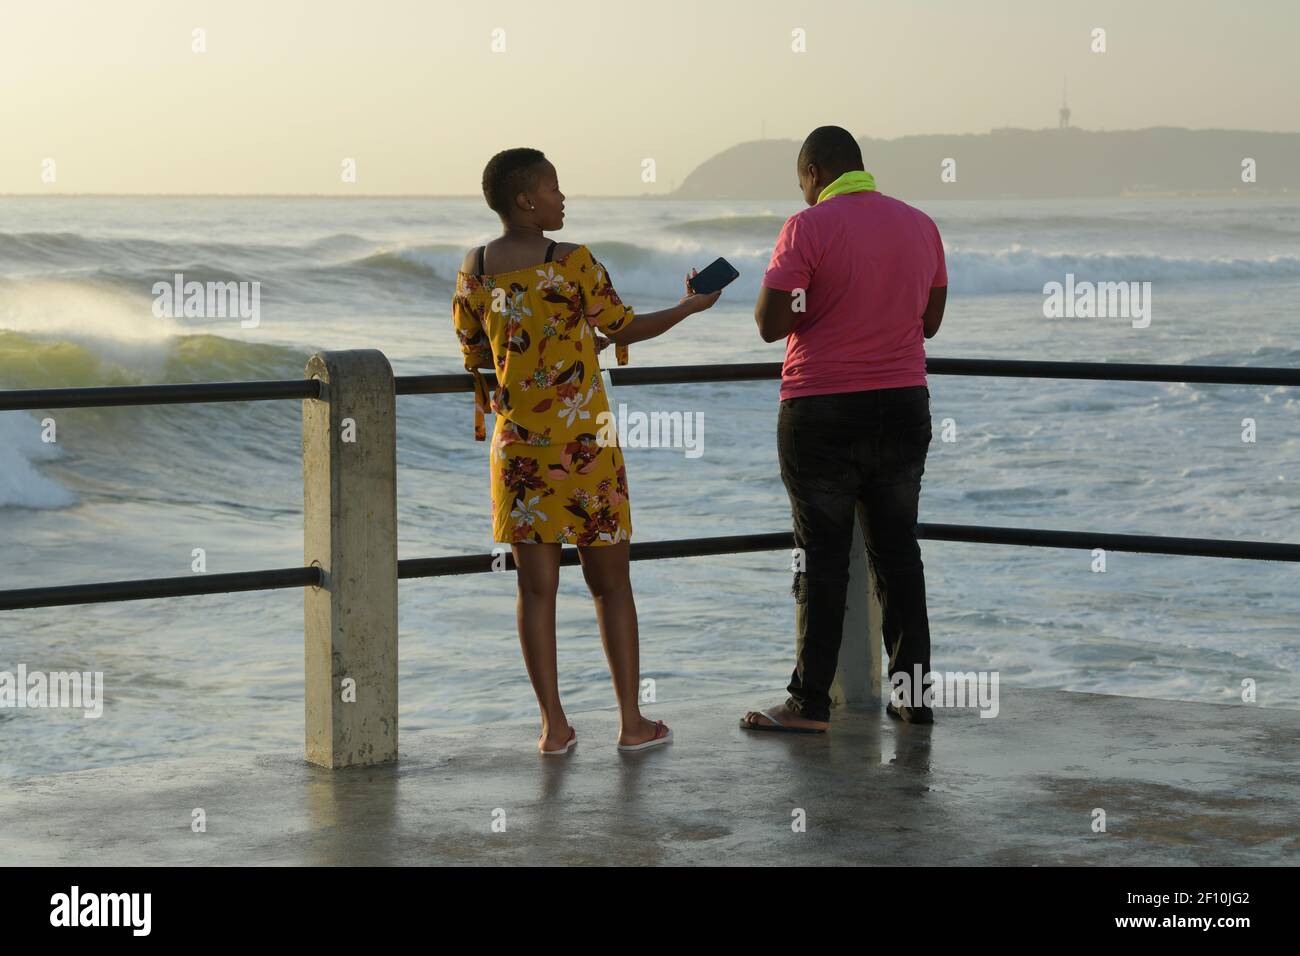 Adult couple, man, woman, standing on pier, looking at sea, ethnic, local tourist, Durban, South Africa, seaside holiday, beach vacation, partners Stock Photo